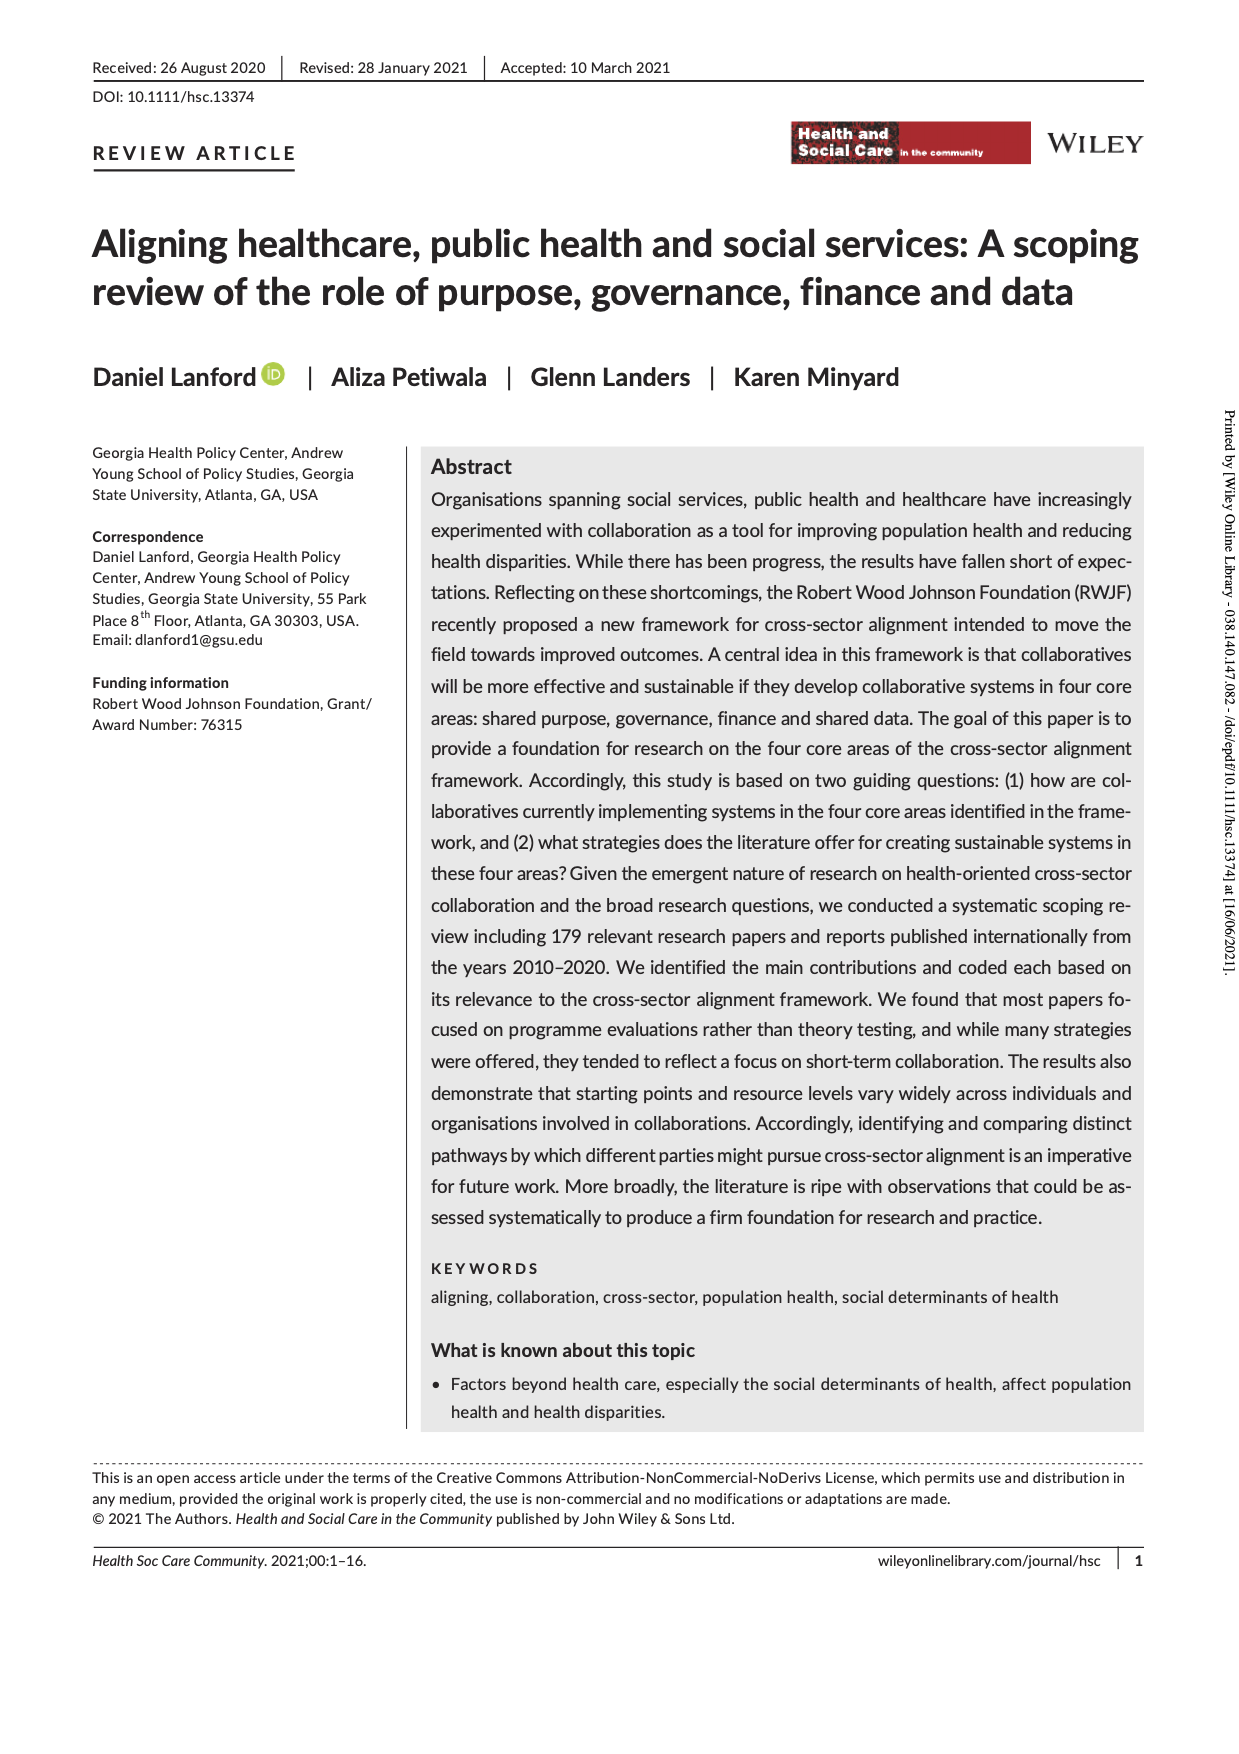 Aligning Healthcare, Public Health and Social Services: A Scoping Review of the Role of Purpose, Governance, Finance and Data